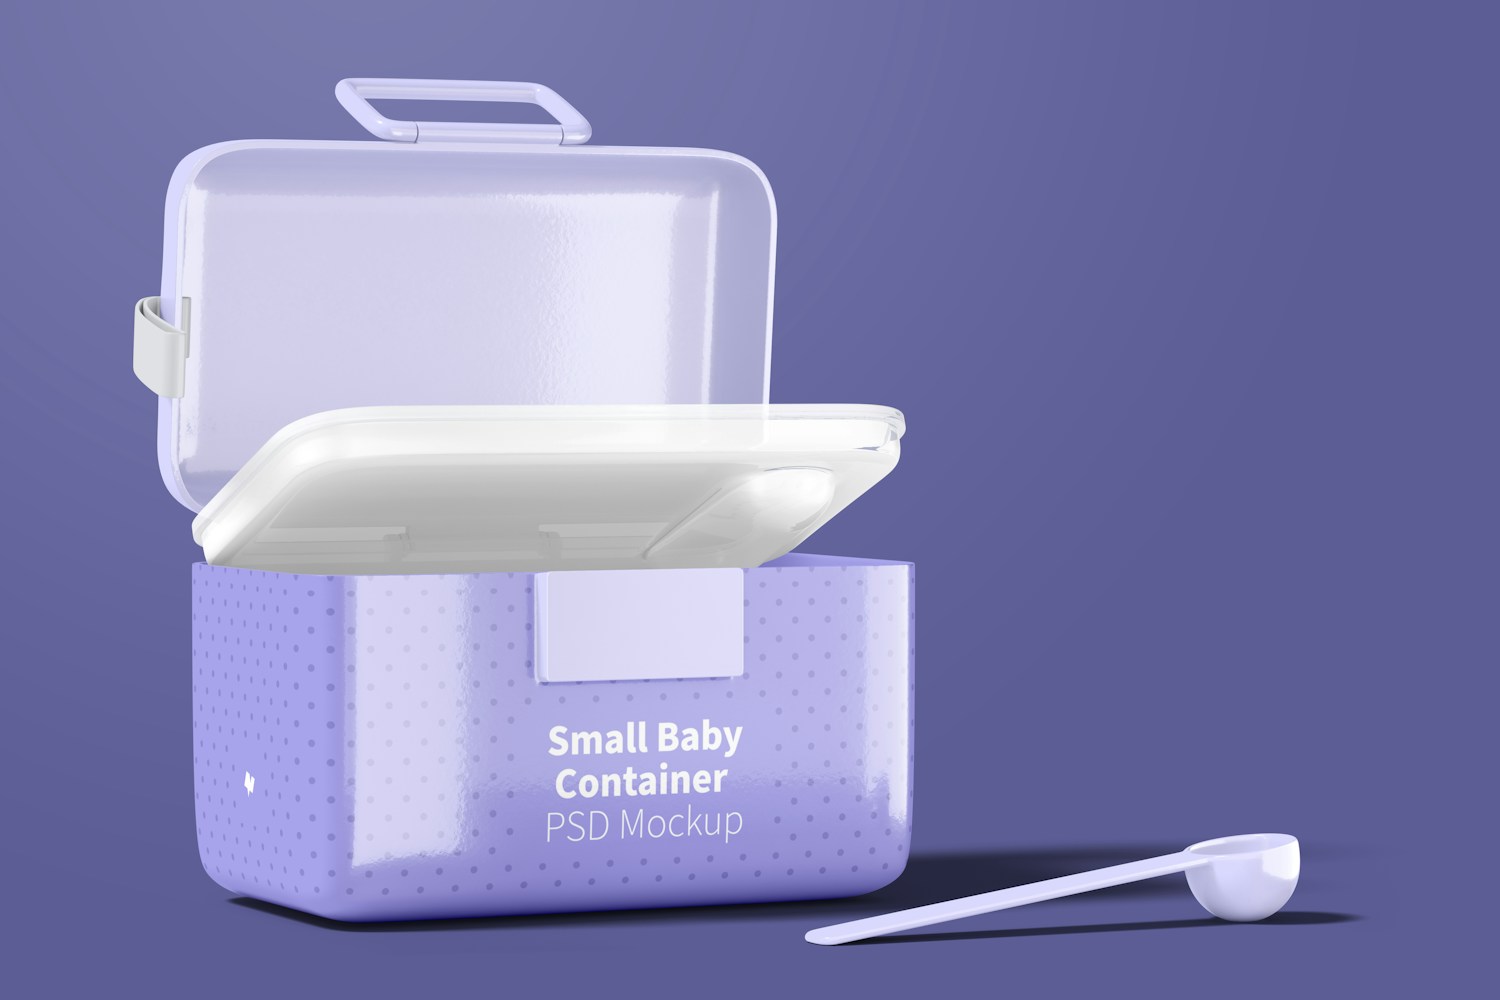 Small Baby Milk Powder Container Mockup, Opened